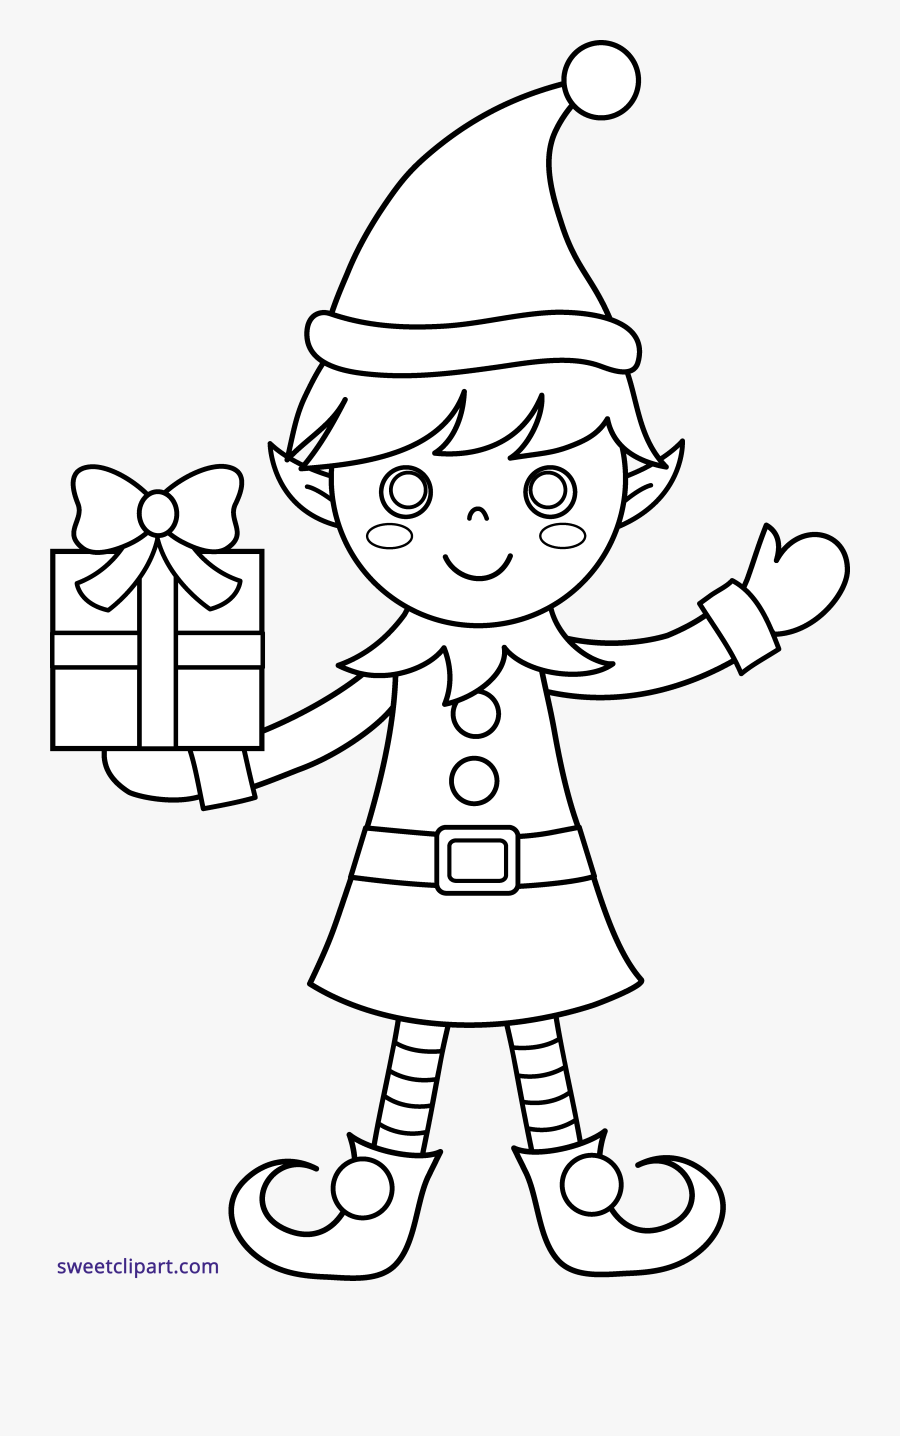 Christmas Black And White Clipart Elf - Christmas Elf Clipart Black And White, Transparent Clipart